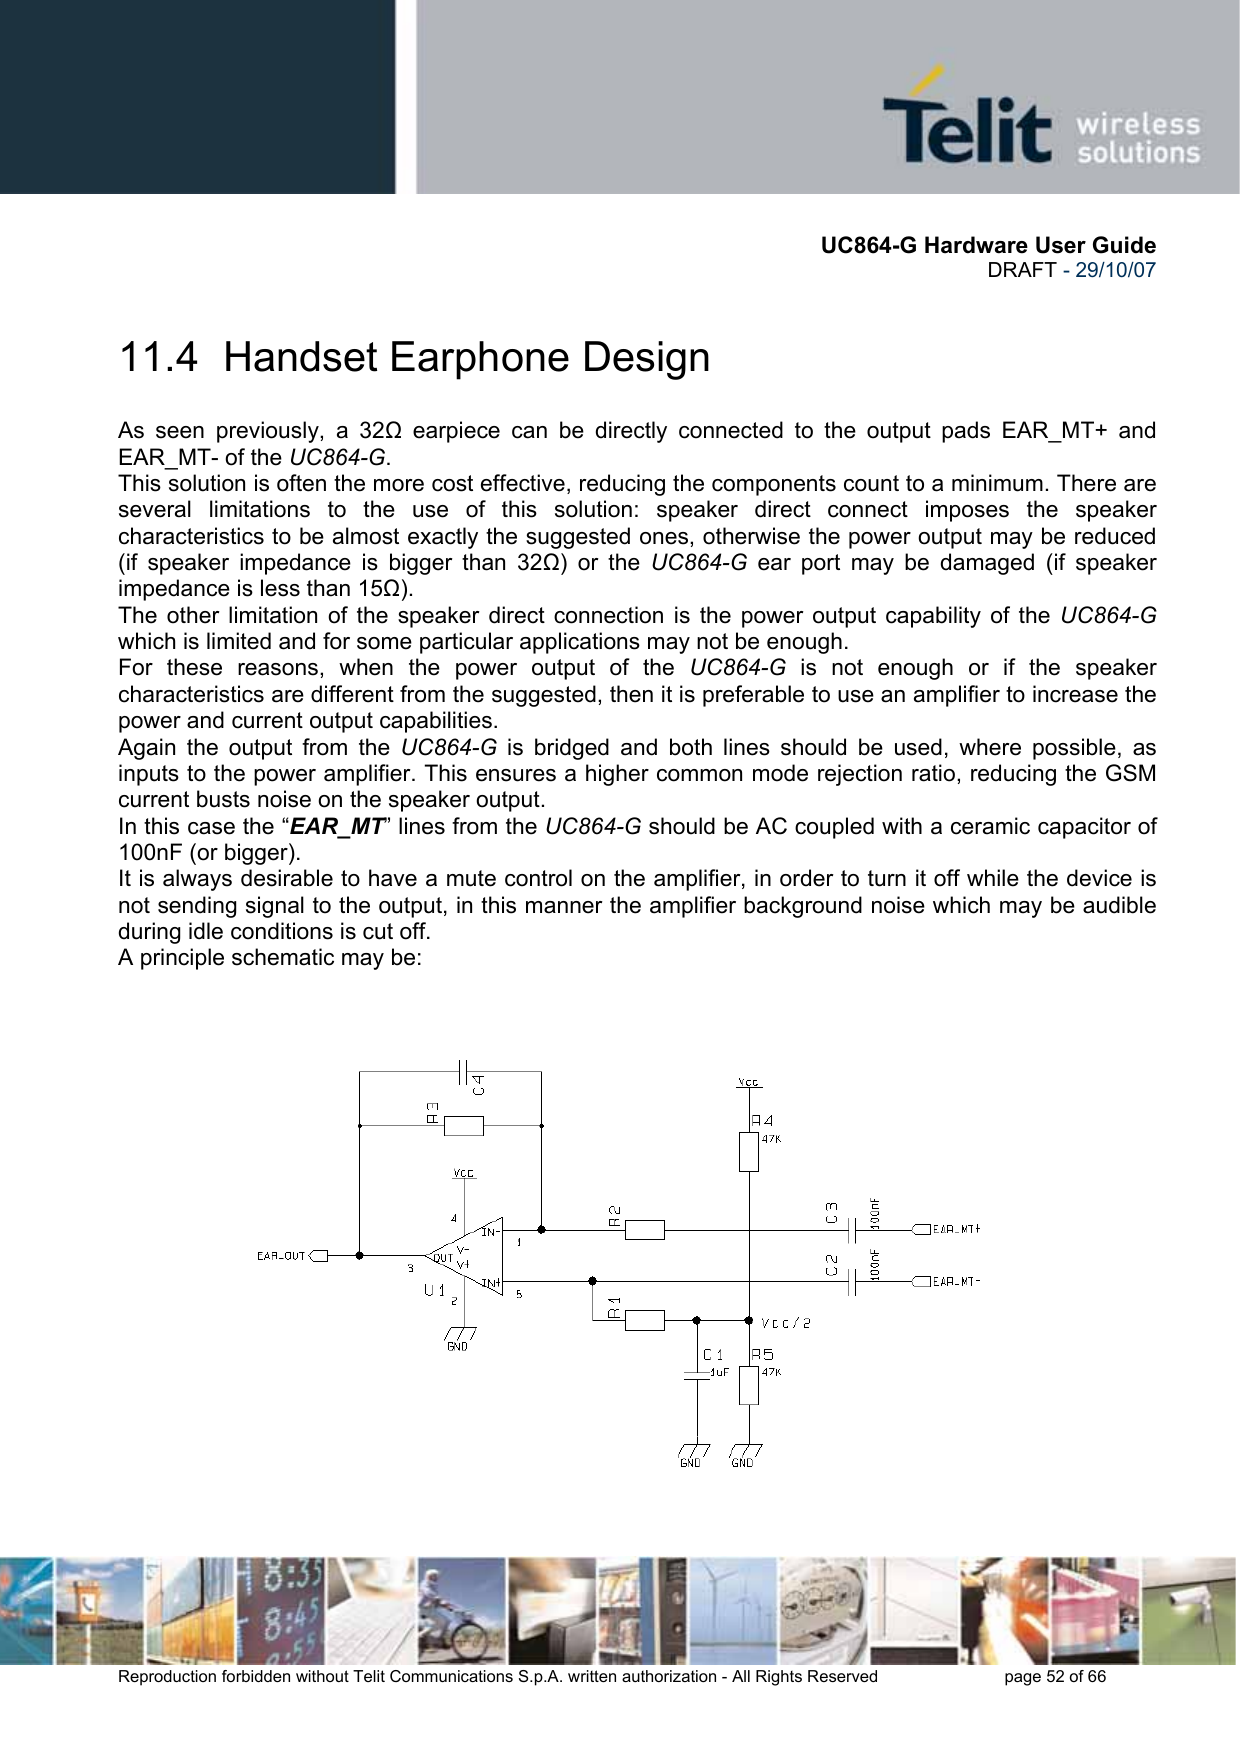       UC864-G Hardware User Guide  DRAFT - 29/10/07      Reproduction forbidden without Telit Communications S.p.A. written authorization - All Rights Reserved    page 52 of 66  11.4  Handset Earphone Design As seen previously, a 32Ω earpiece can be directly connected to the output pads EAR_MT+ and EAR_MT- of the UC864-G. This solution is often the more cost effective, reducing the components count to a minimum. There are several limitations to the use of this solution: speaker direct connect imposes the speaker characteristics to be almost exactly the suggested ones, otherwise the power output may be reduced (if speaker impedance is bigger than 32Ω) or the UC864-G ear port may be damaged (if speaker impedance is less than 15Ω). The other limitation of the speaker direct connection is the power output capability of the UC864-G which is limited and for some particular applications may not be enough. For these reasons, when the power output of the UC864-G is not enough or if the speaker characteristics are different from the suggested, then it is preferable to use an amplifier to increase the power and current output capabilities.  Again the output from the UC864-G is bridged and both lines should be used, where possible, as inputs to the power amplifier. This ensures a higher common mode rejection ratio, reducing the GSM current busts noise on the speaker output. In this case the “EAR_MT” lines from the UC864-G should be AC coupled with a ceramic capacitor of 100nF (or bigger). It is always desirable to have a mute control on the amplifier, in order to turn it off while the device is not sending signal to the output, in this manner the amplifier background noise which may be audible during idle conditions is cut off. A principle schematic may be:  